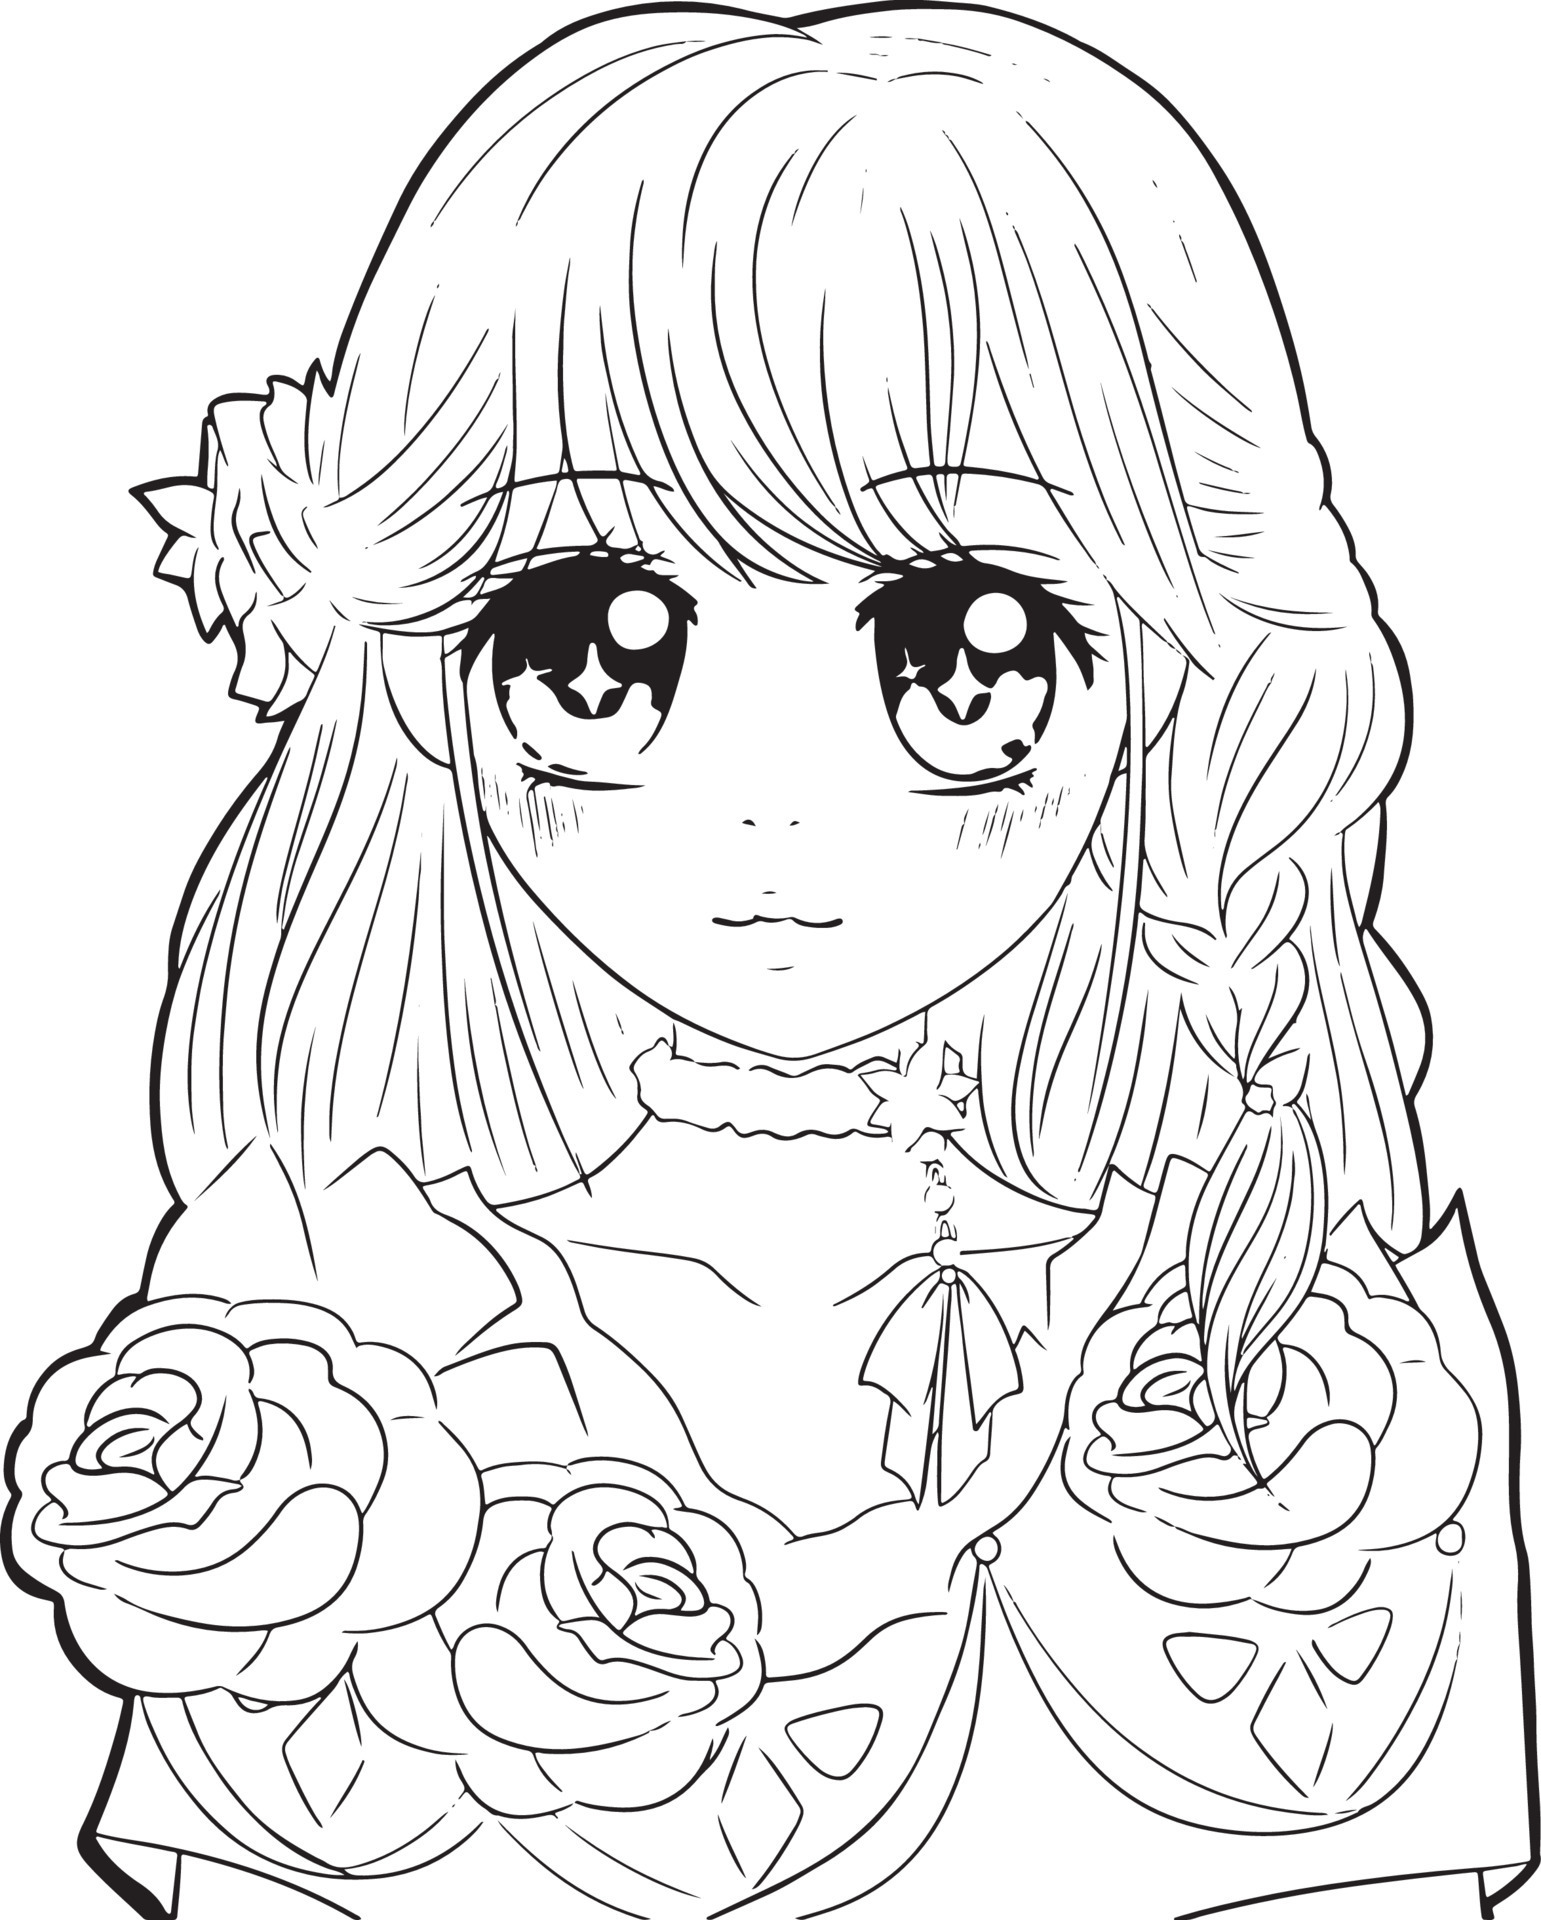 Free Printable Anime Cute Coloring Pages for Kids  Coloring Pages  GBcoloring